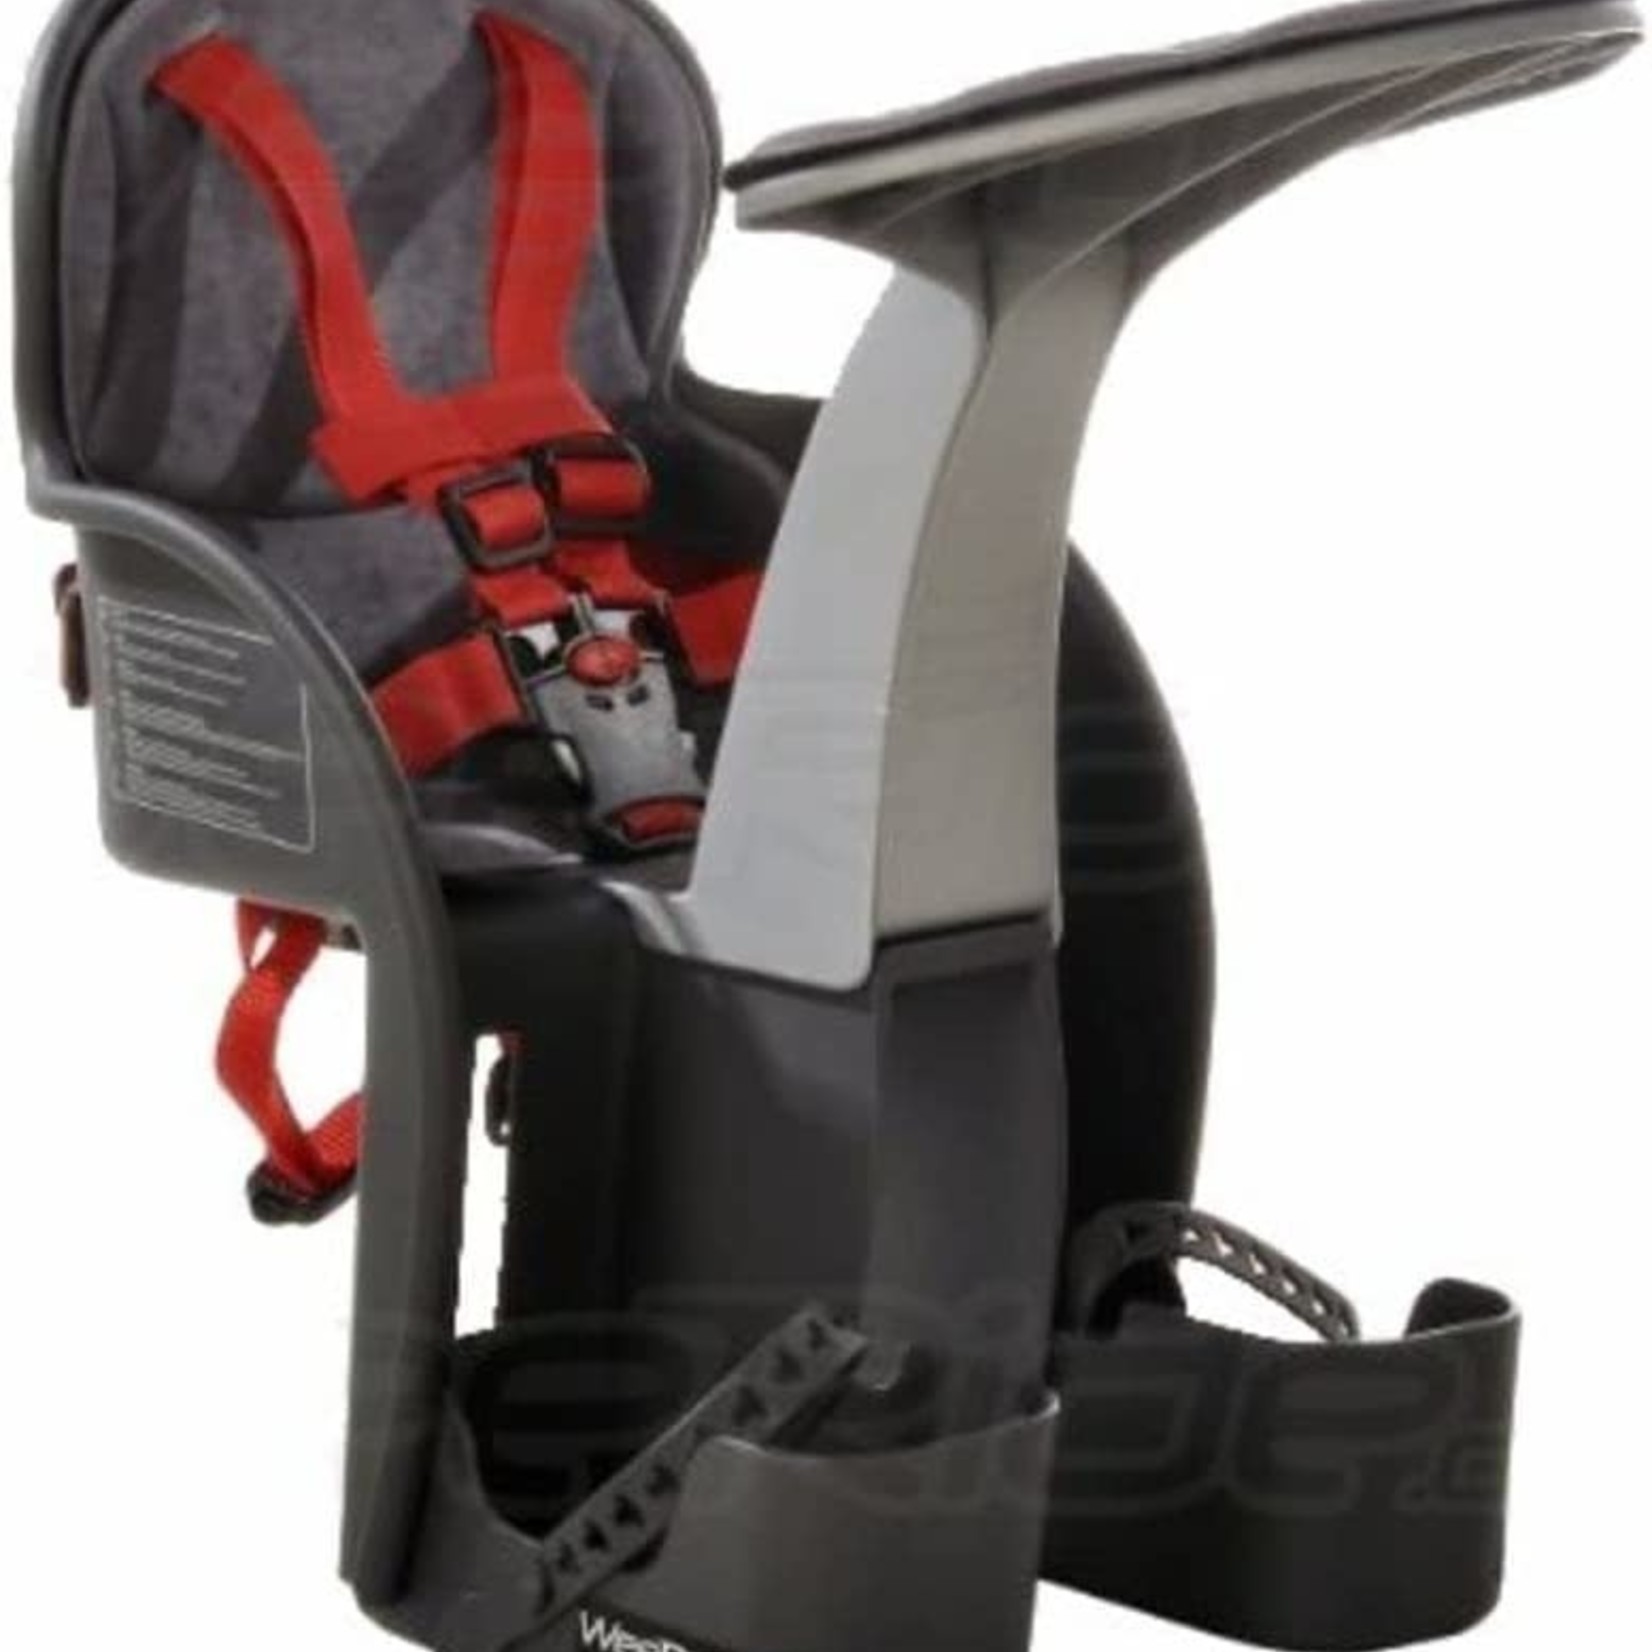 WeeRide Bicycle Child Carrier